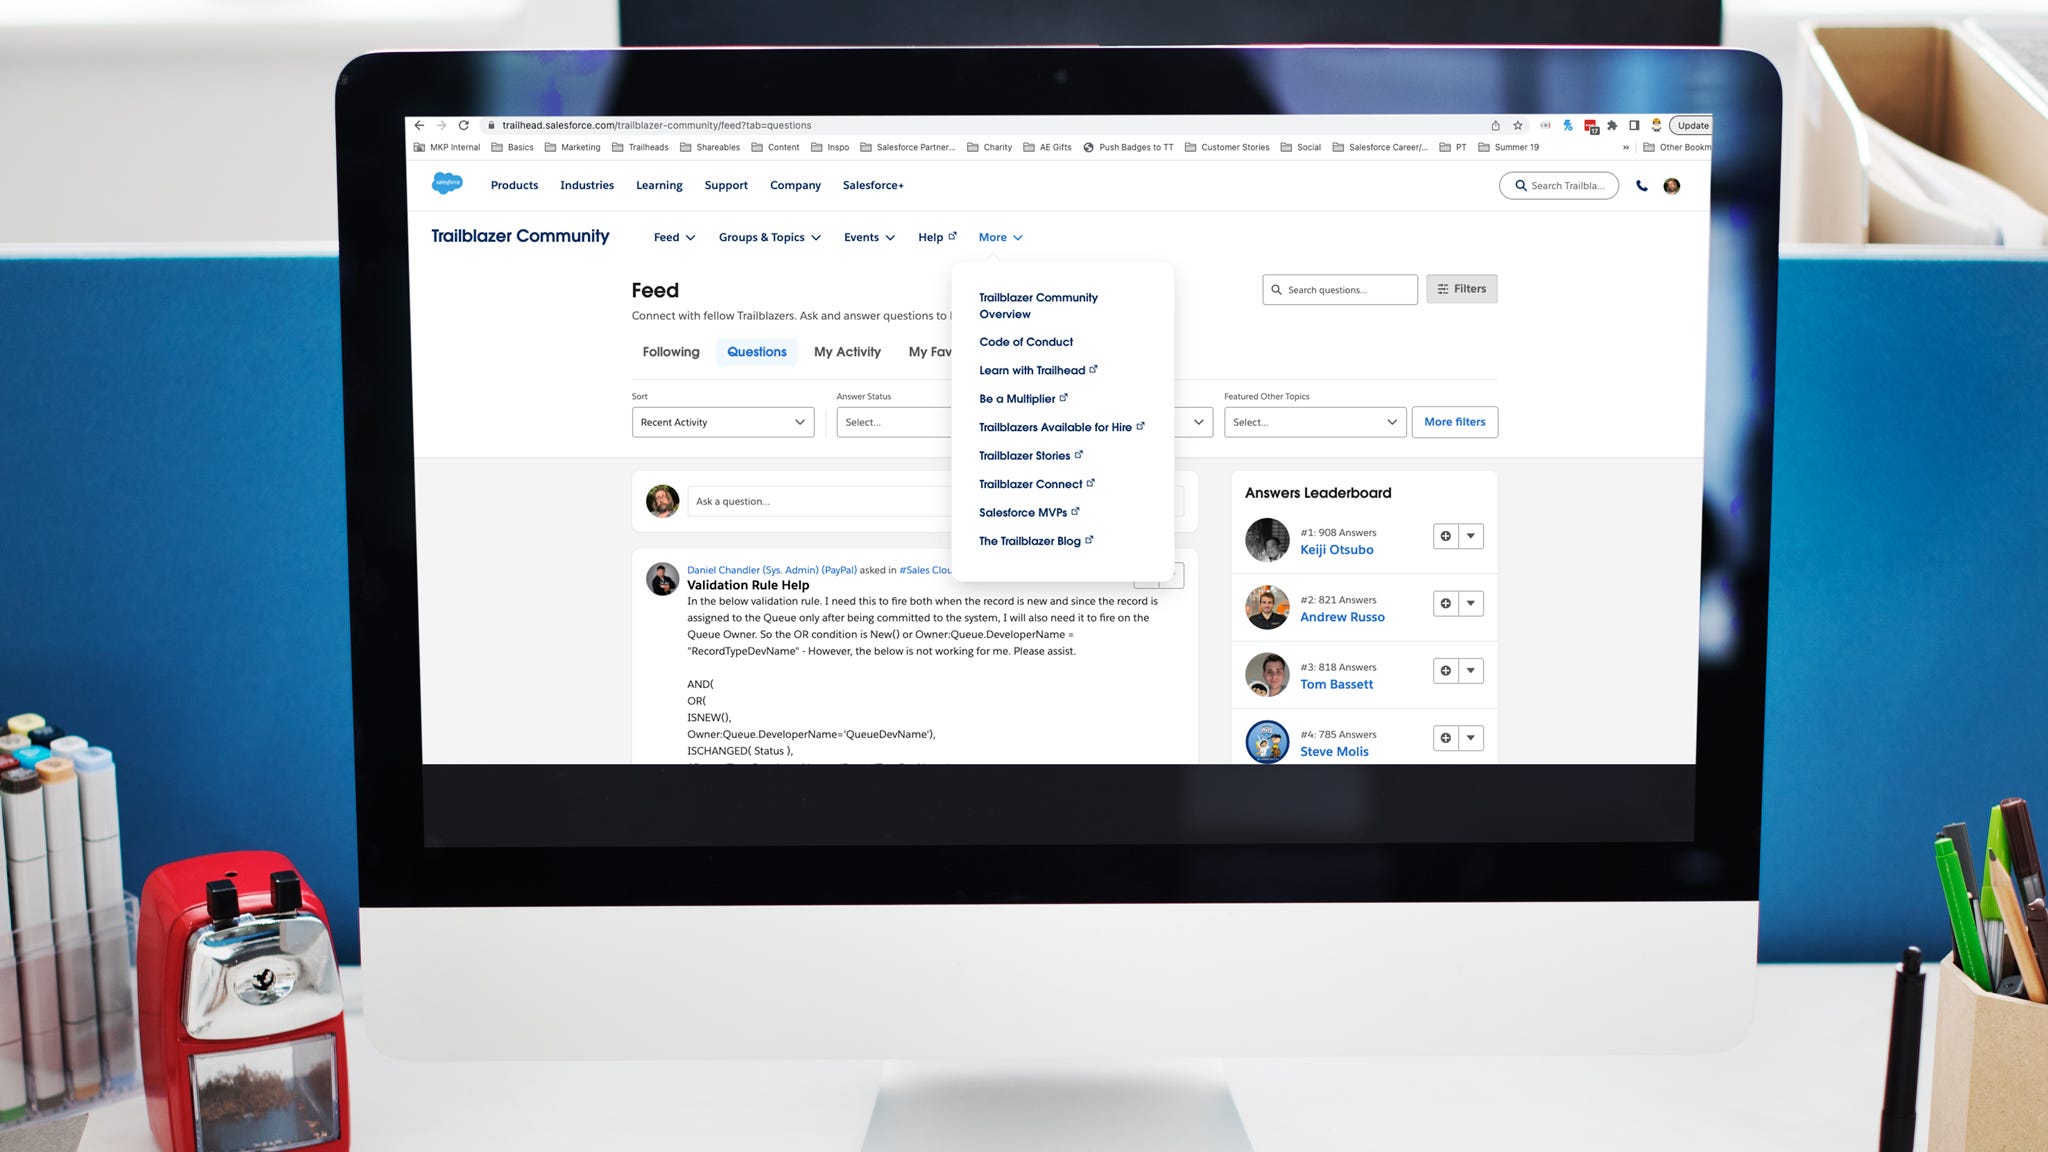 A New Look for the Trailblazer Community